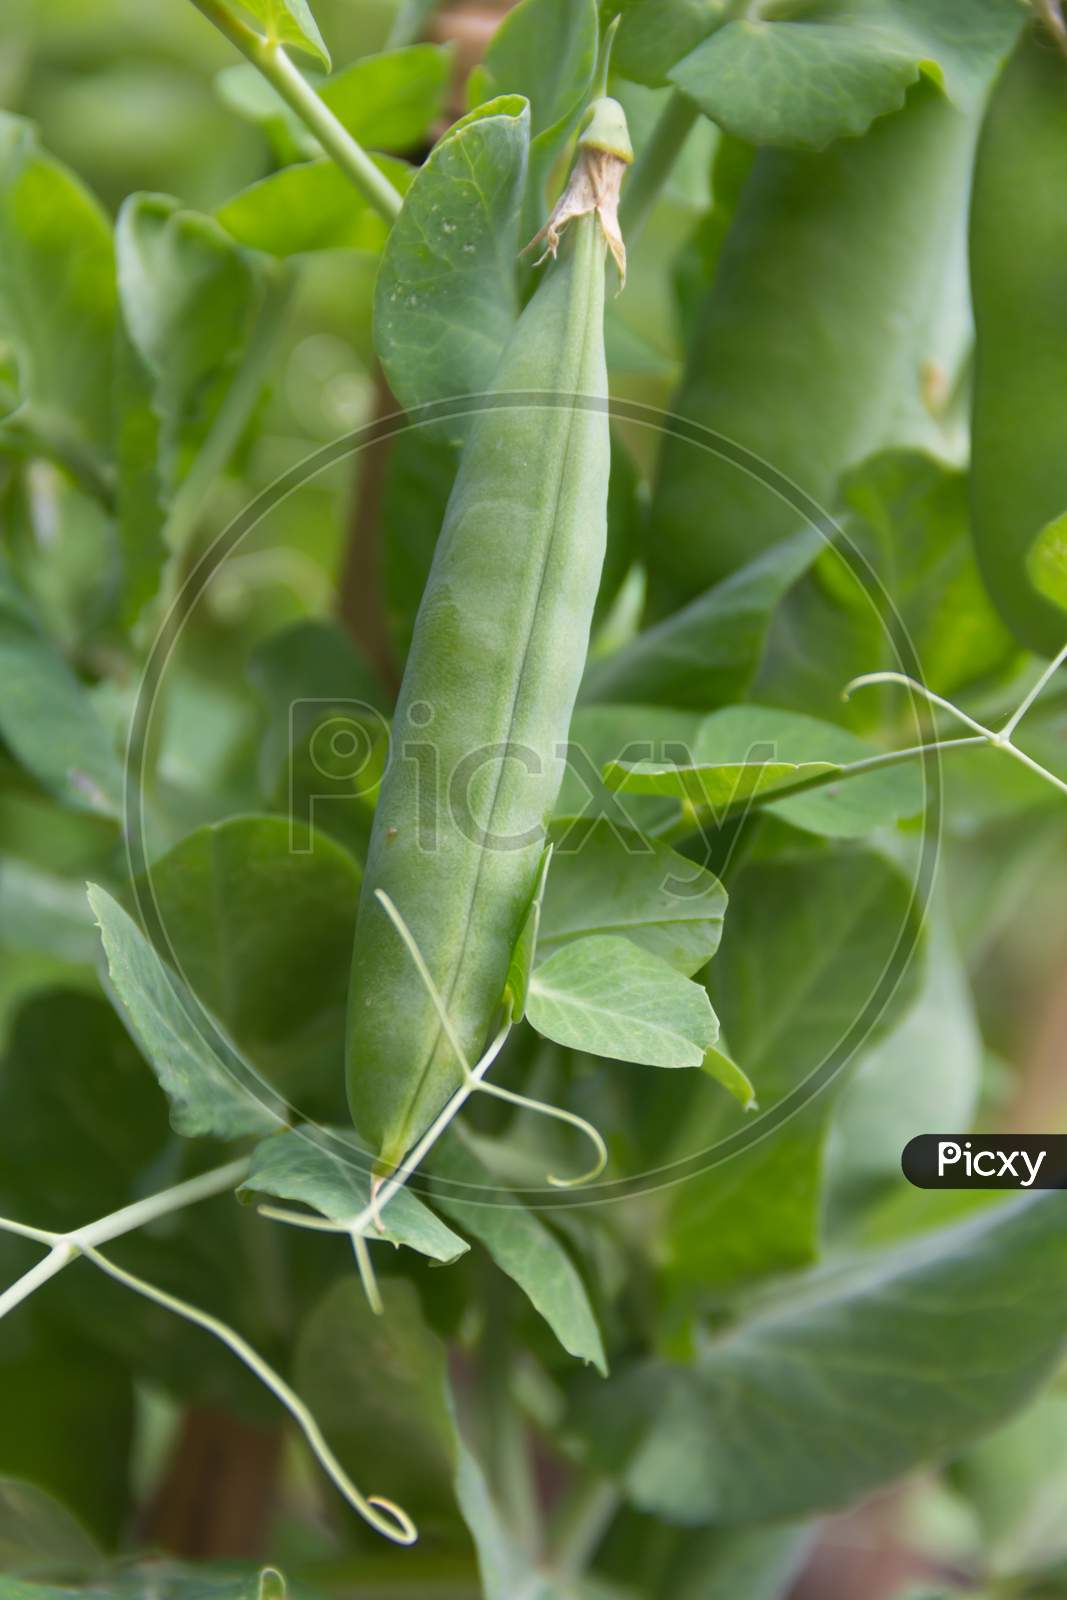 Detail Of The Green Pea Beans On The Organic Garden Plant